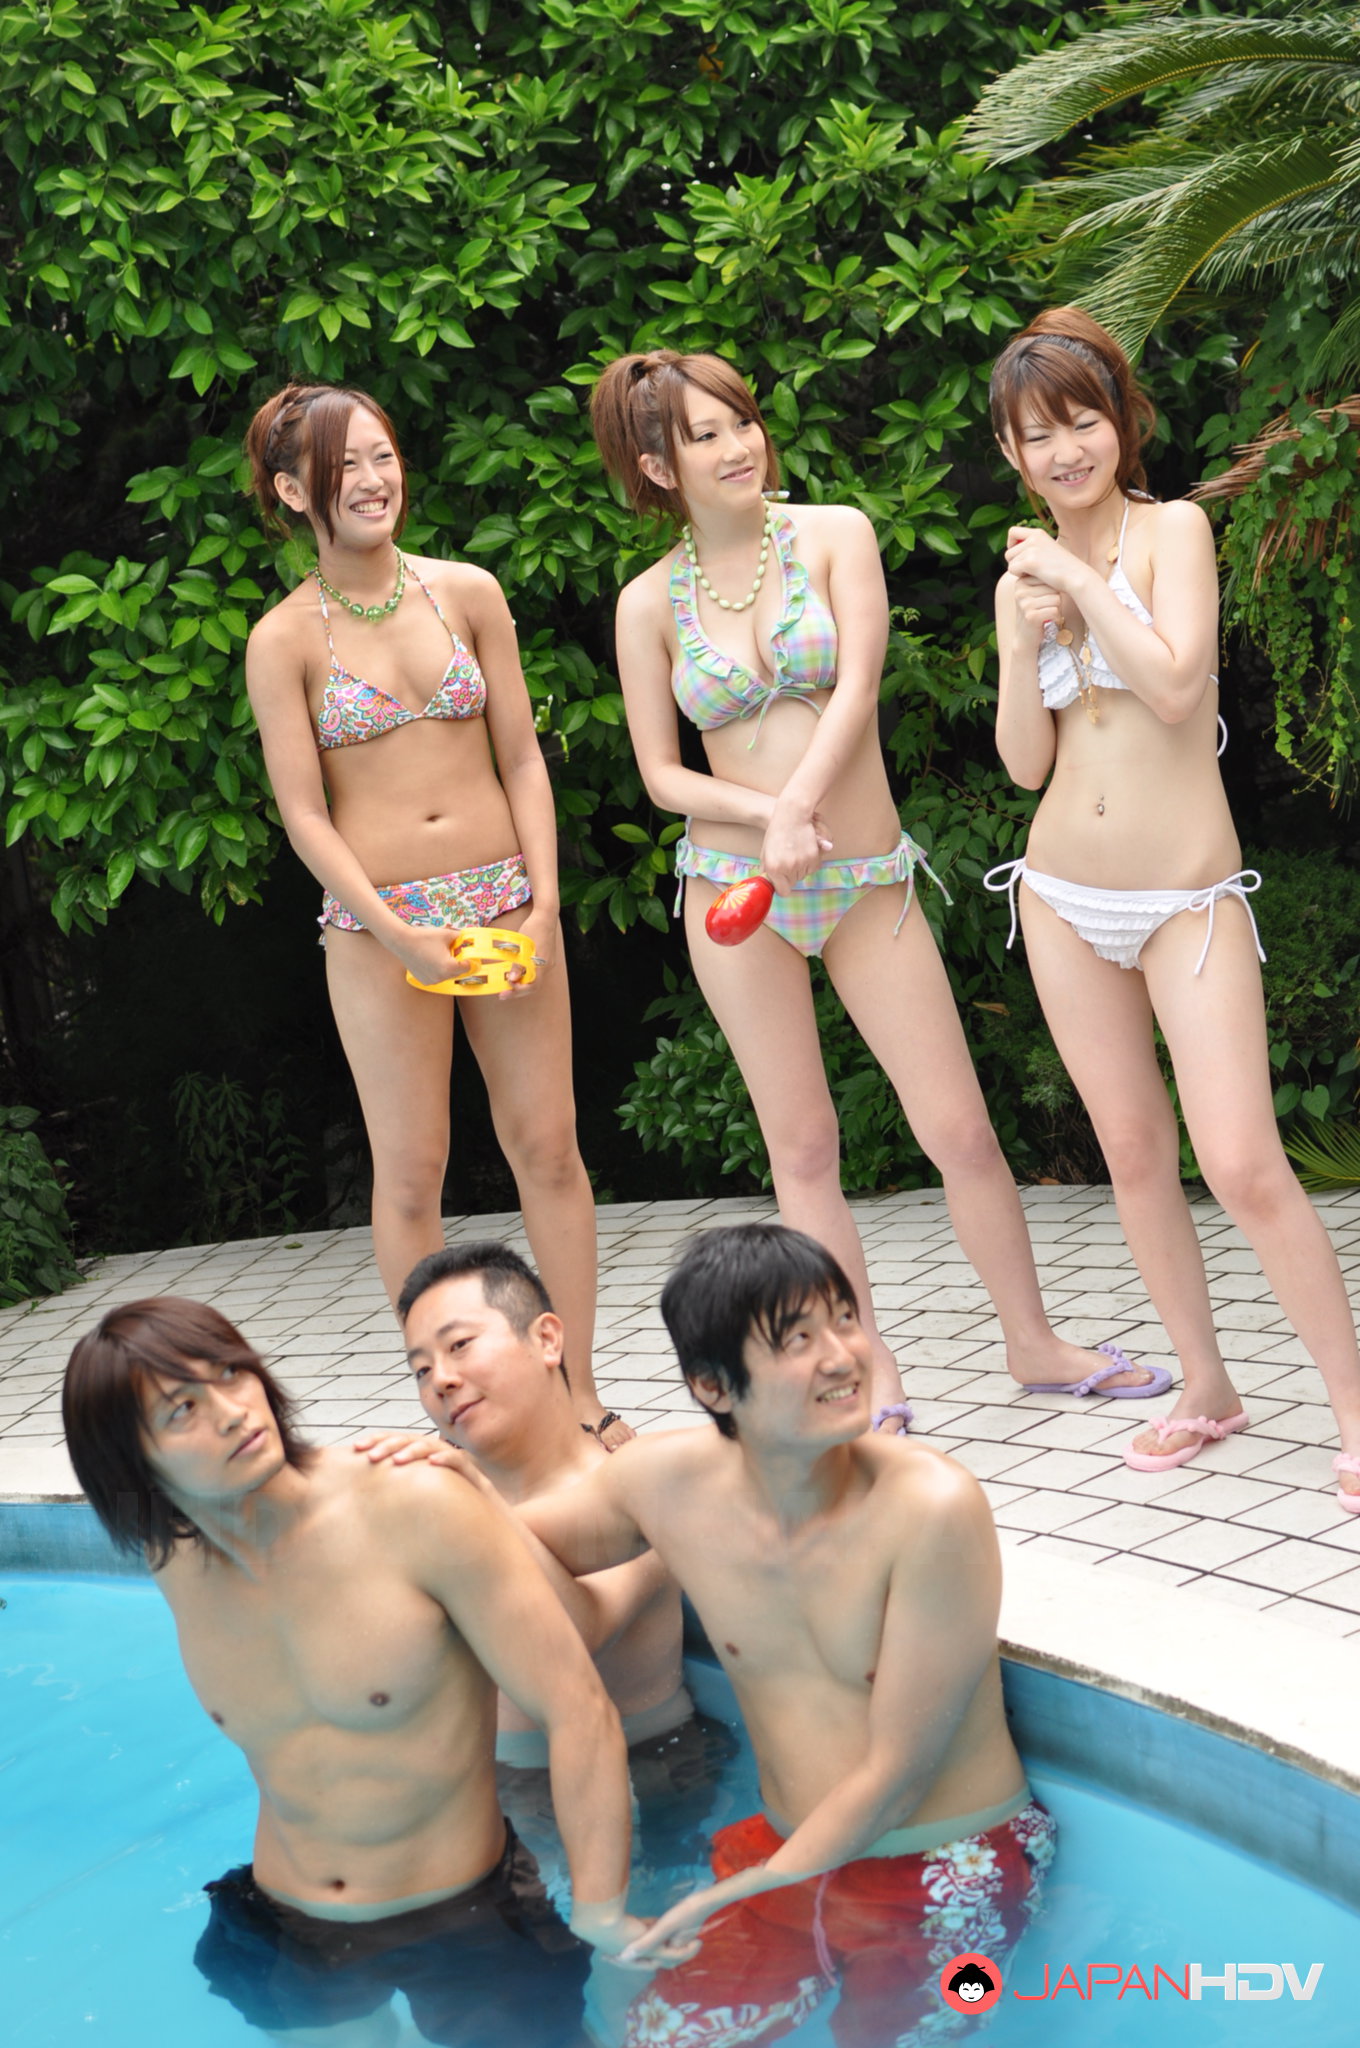 Girl Pool Party - Japanese girls enjoy in some sexy pool party